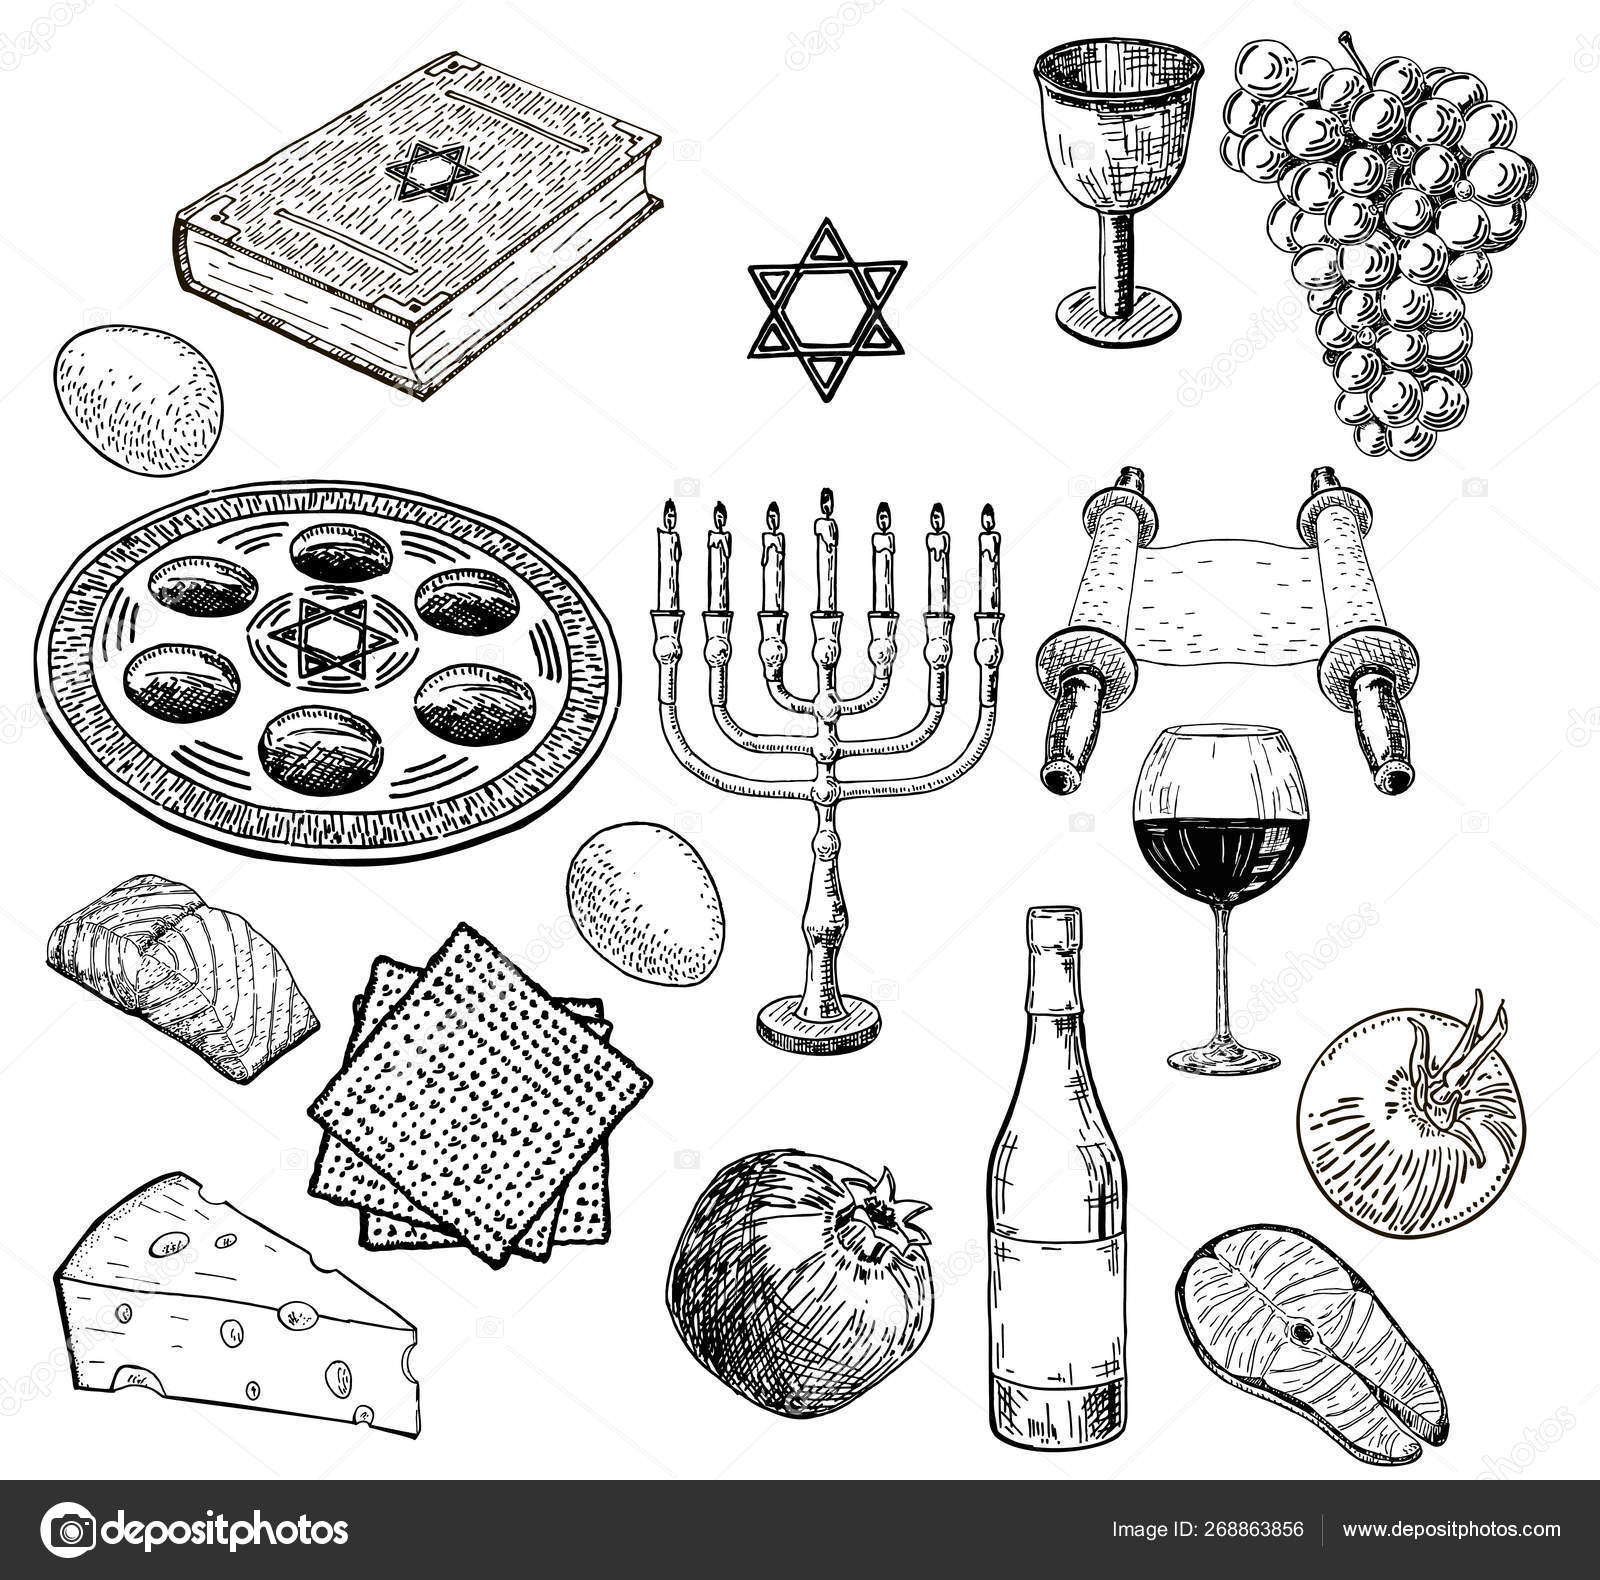 Download Vector Set Sketches Theme Passover Attributes Symbols Jewish Holiday Dish Vector Image By C Luisvv Vector Stock 268863856